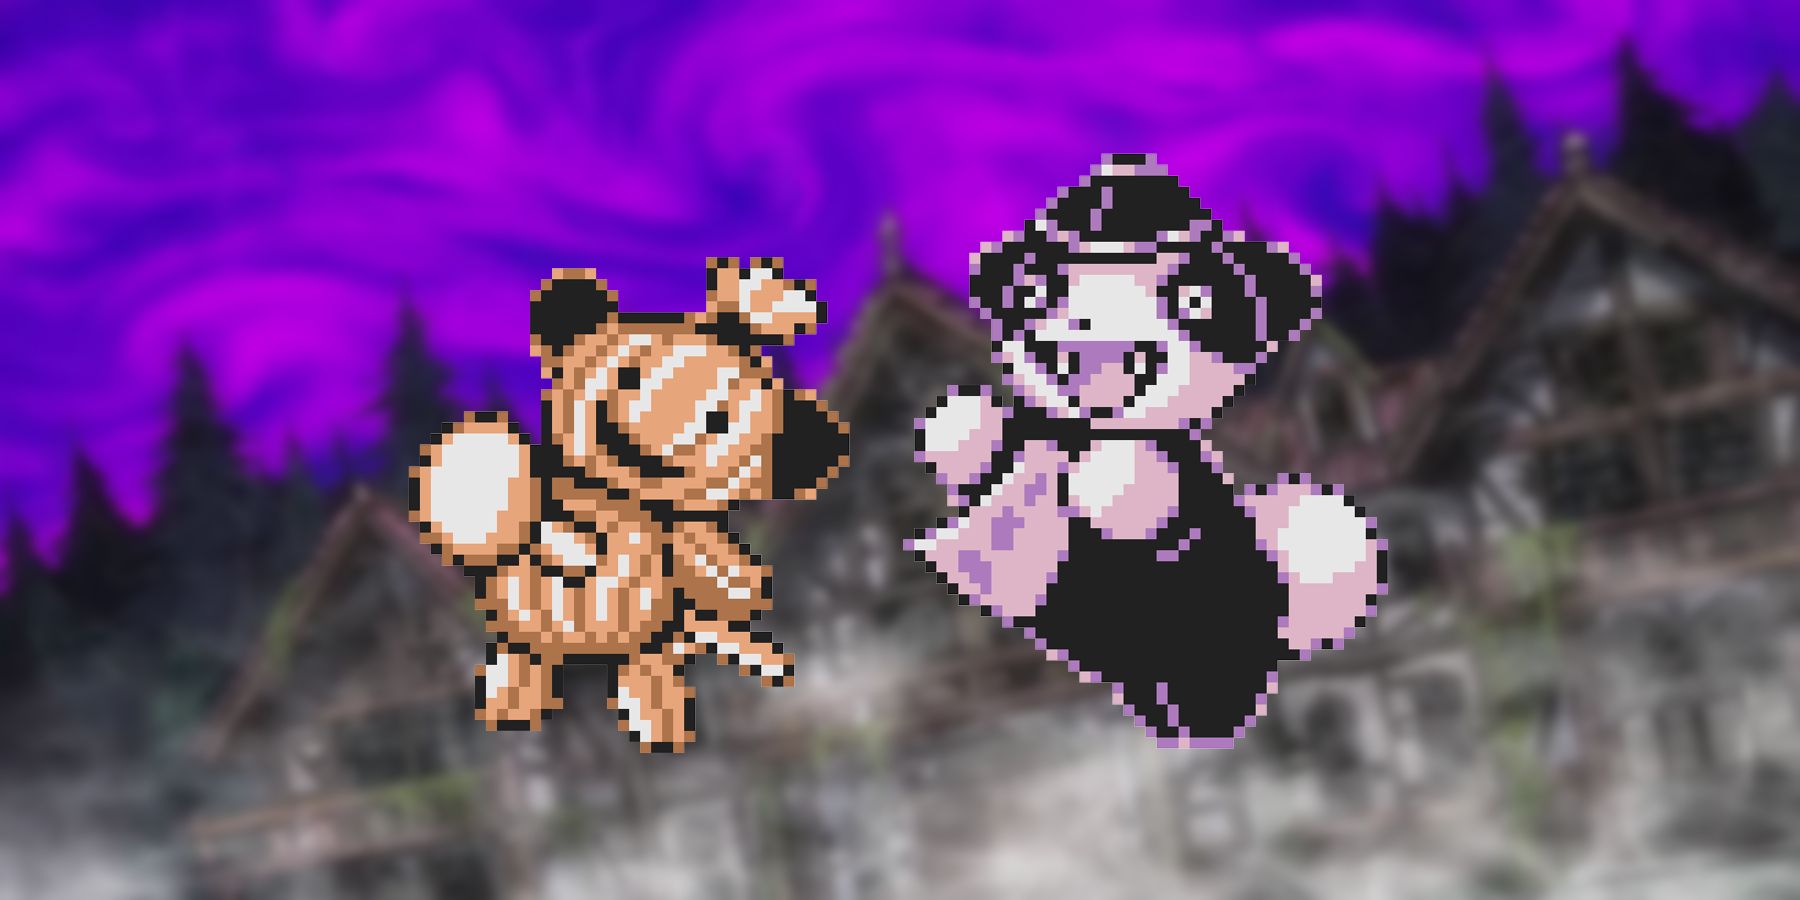 The beta designs for Norowara and Kyonpan scrapped from Pokemon Gold and Silver